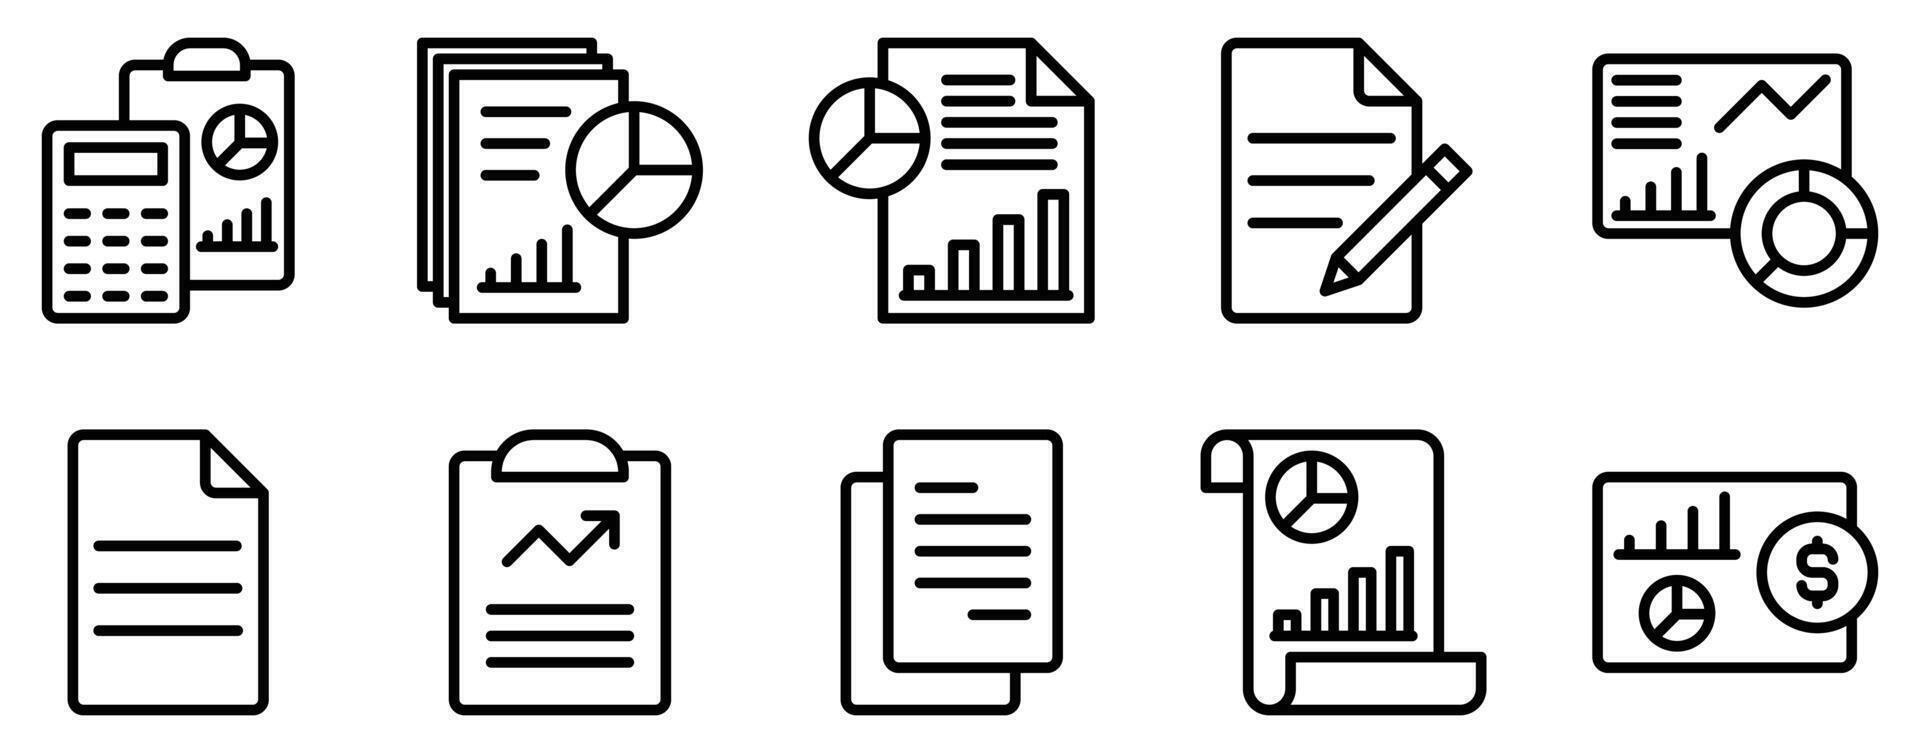 report icon line style set collection vector